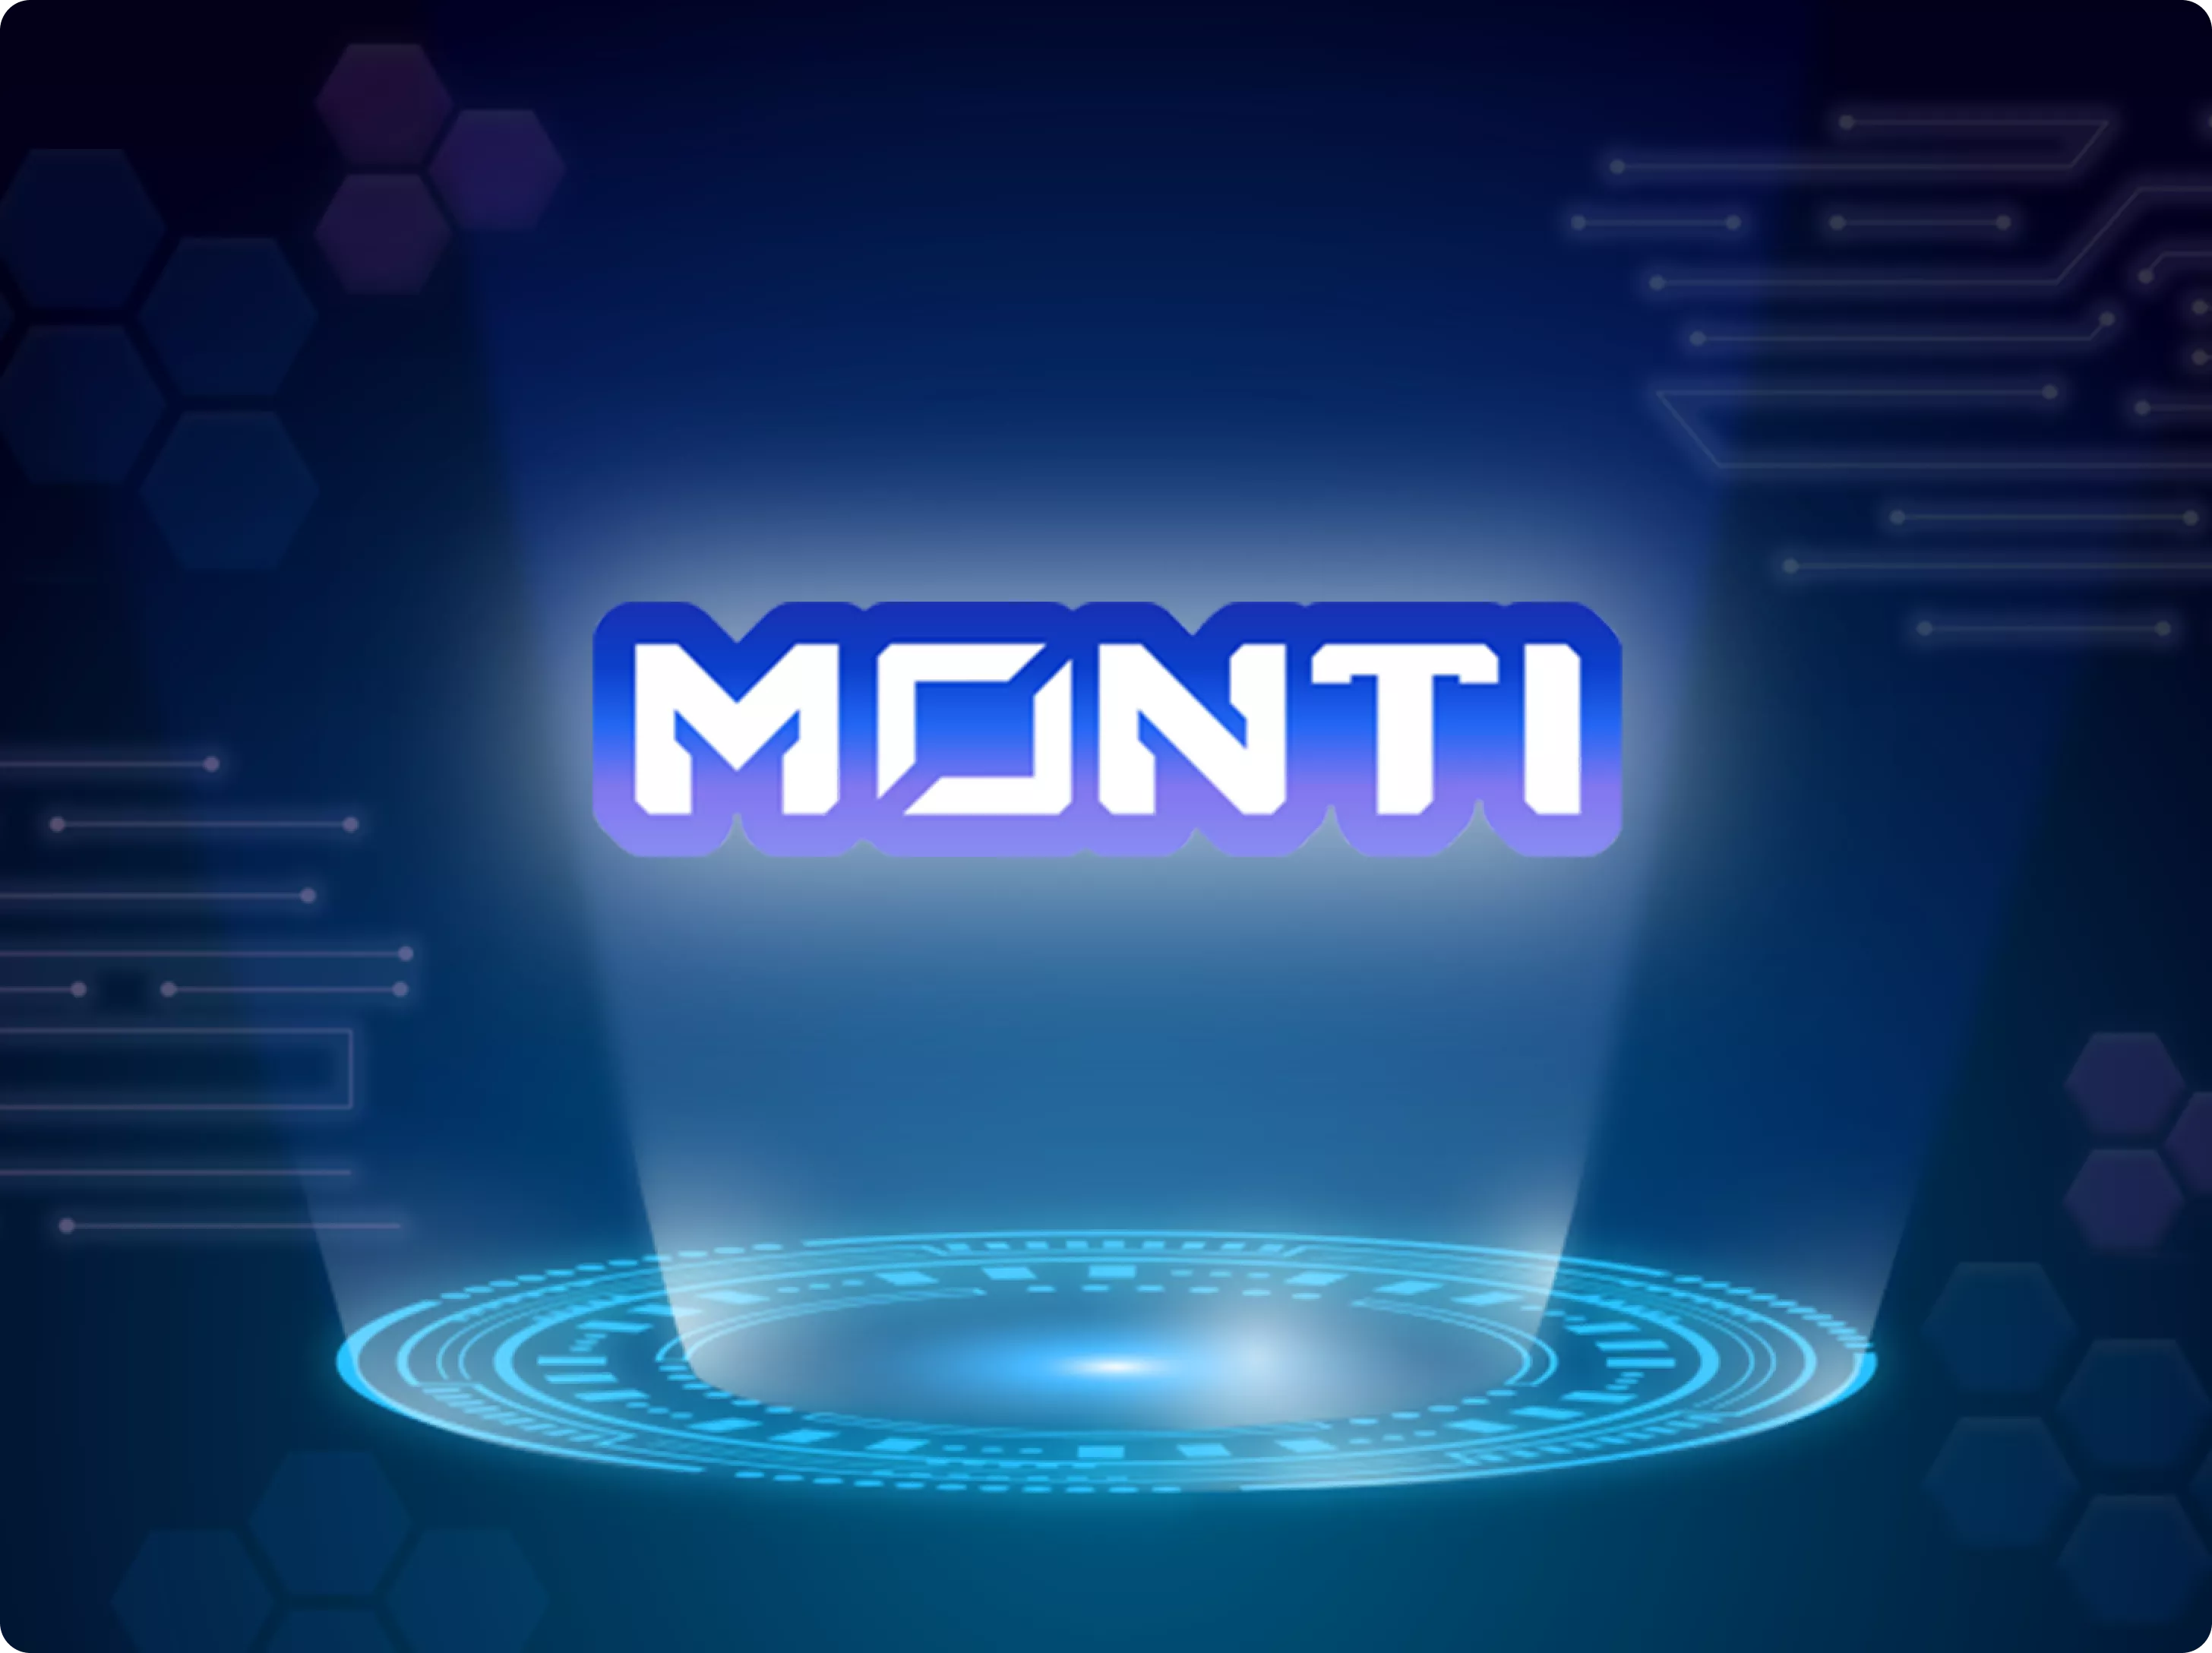 Monti - fast-paced online casino game